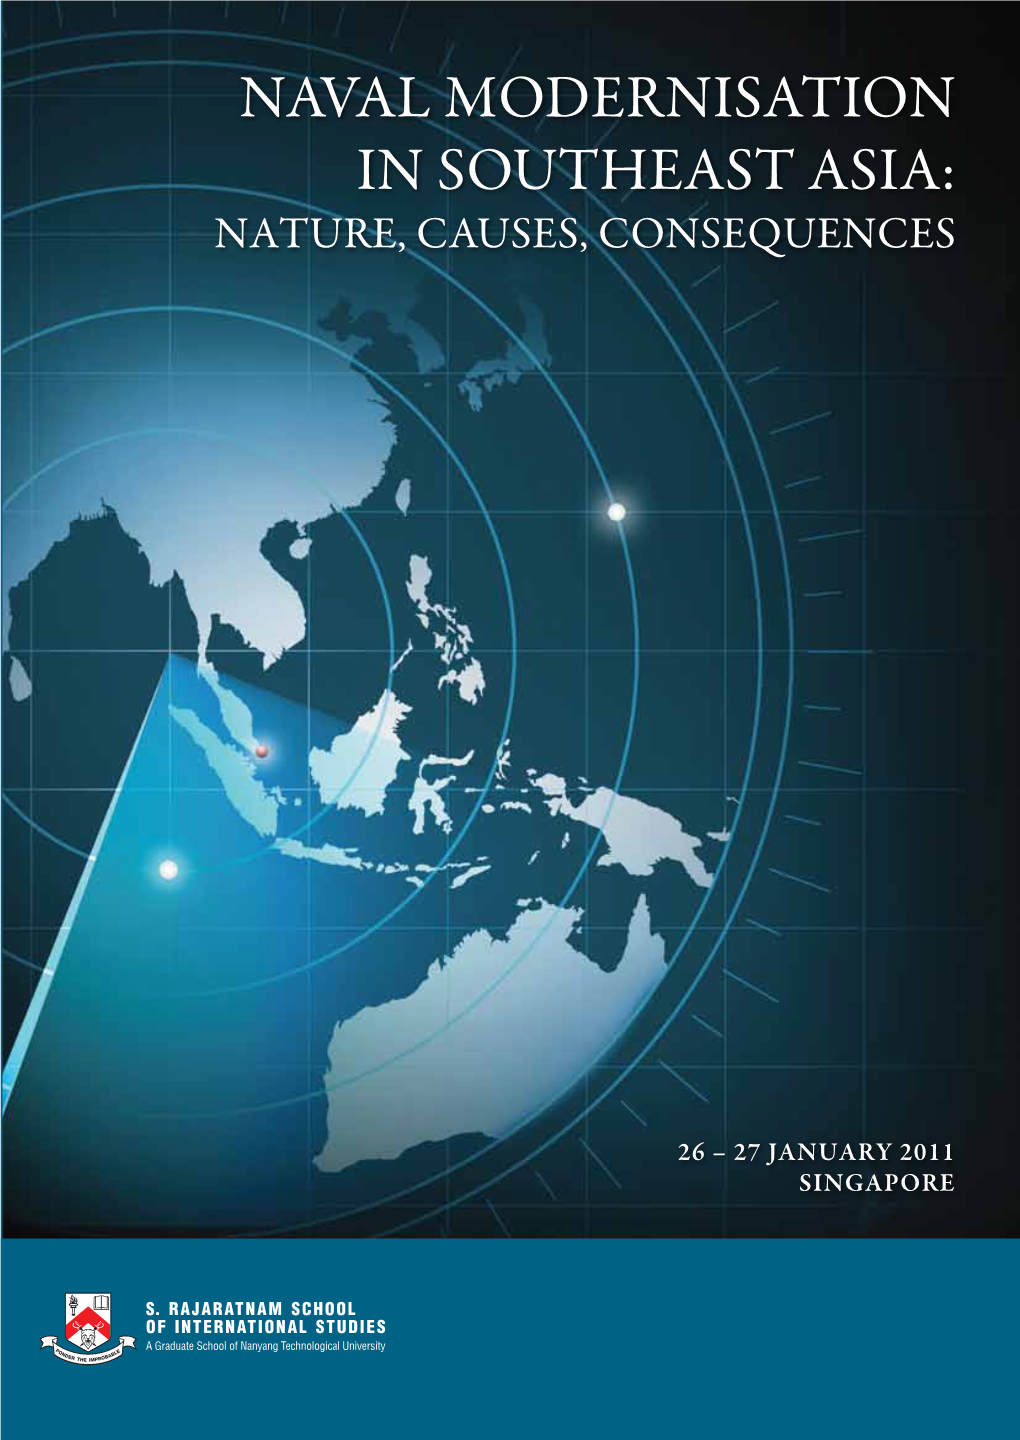 Naval Modernisation in Southeast Asia: Nature, Causes, Consequences